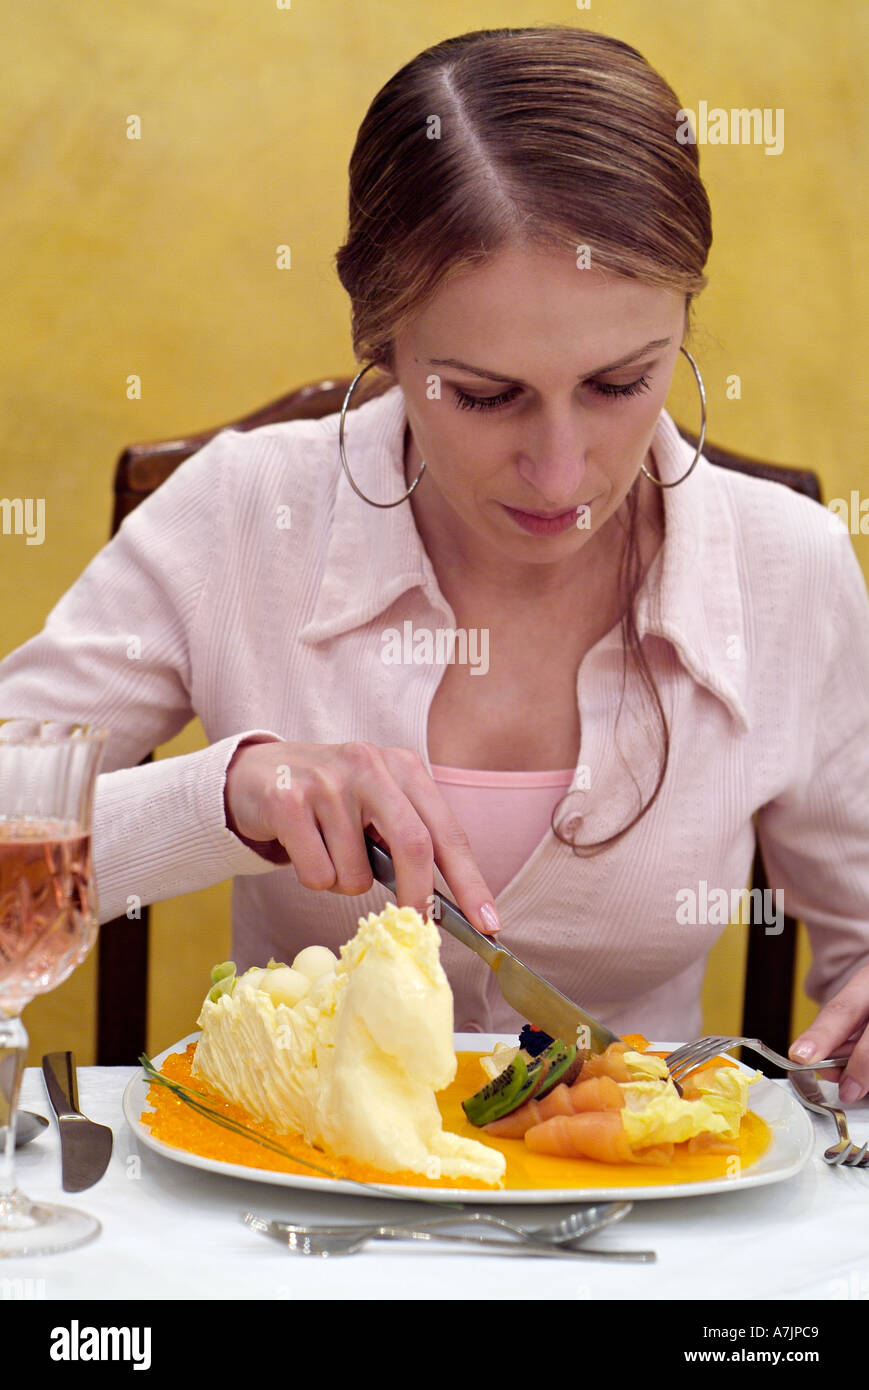 Woman Eating Smoked Salmon at a Restaurant Table Stock Photo